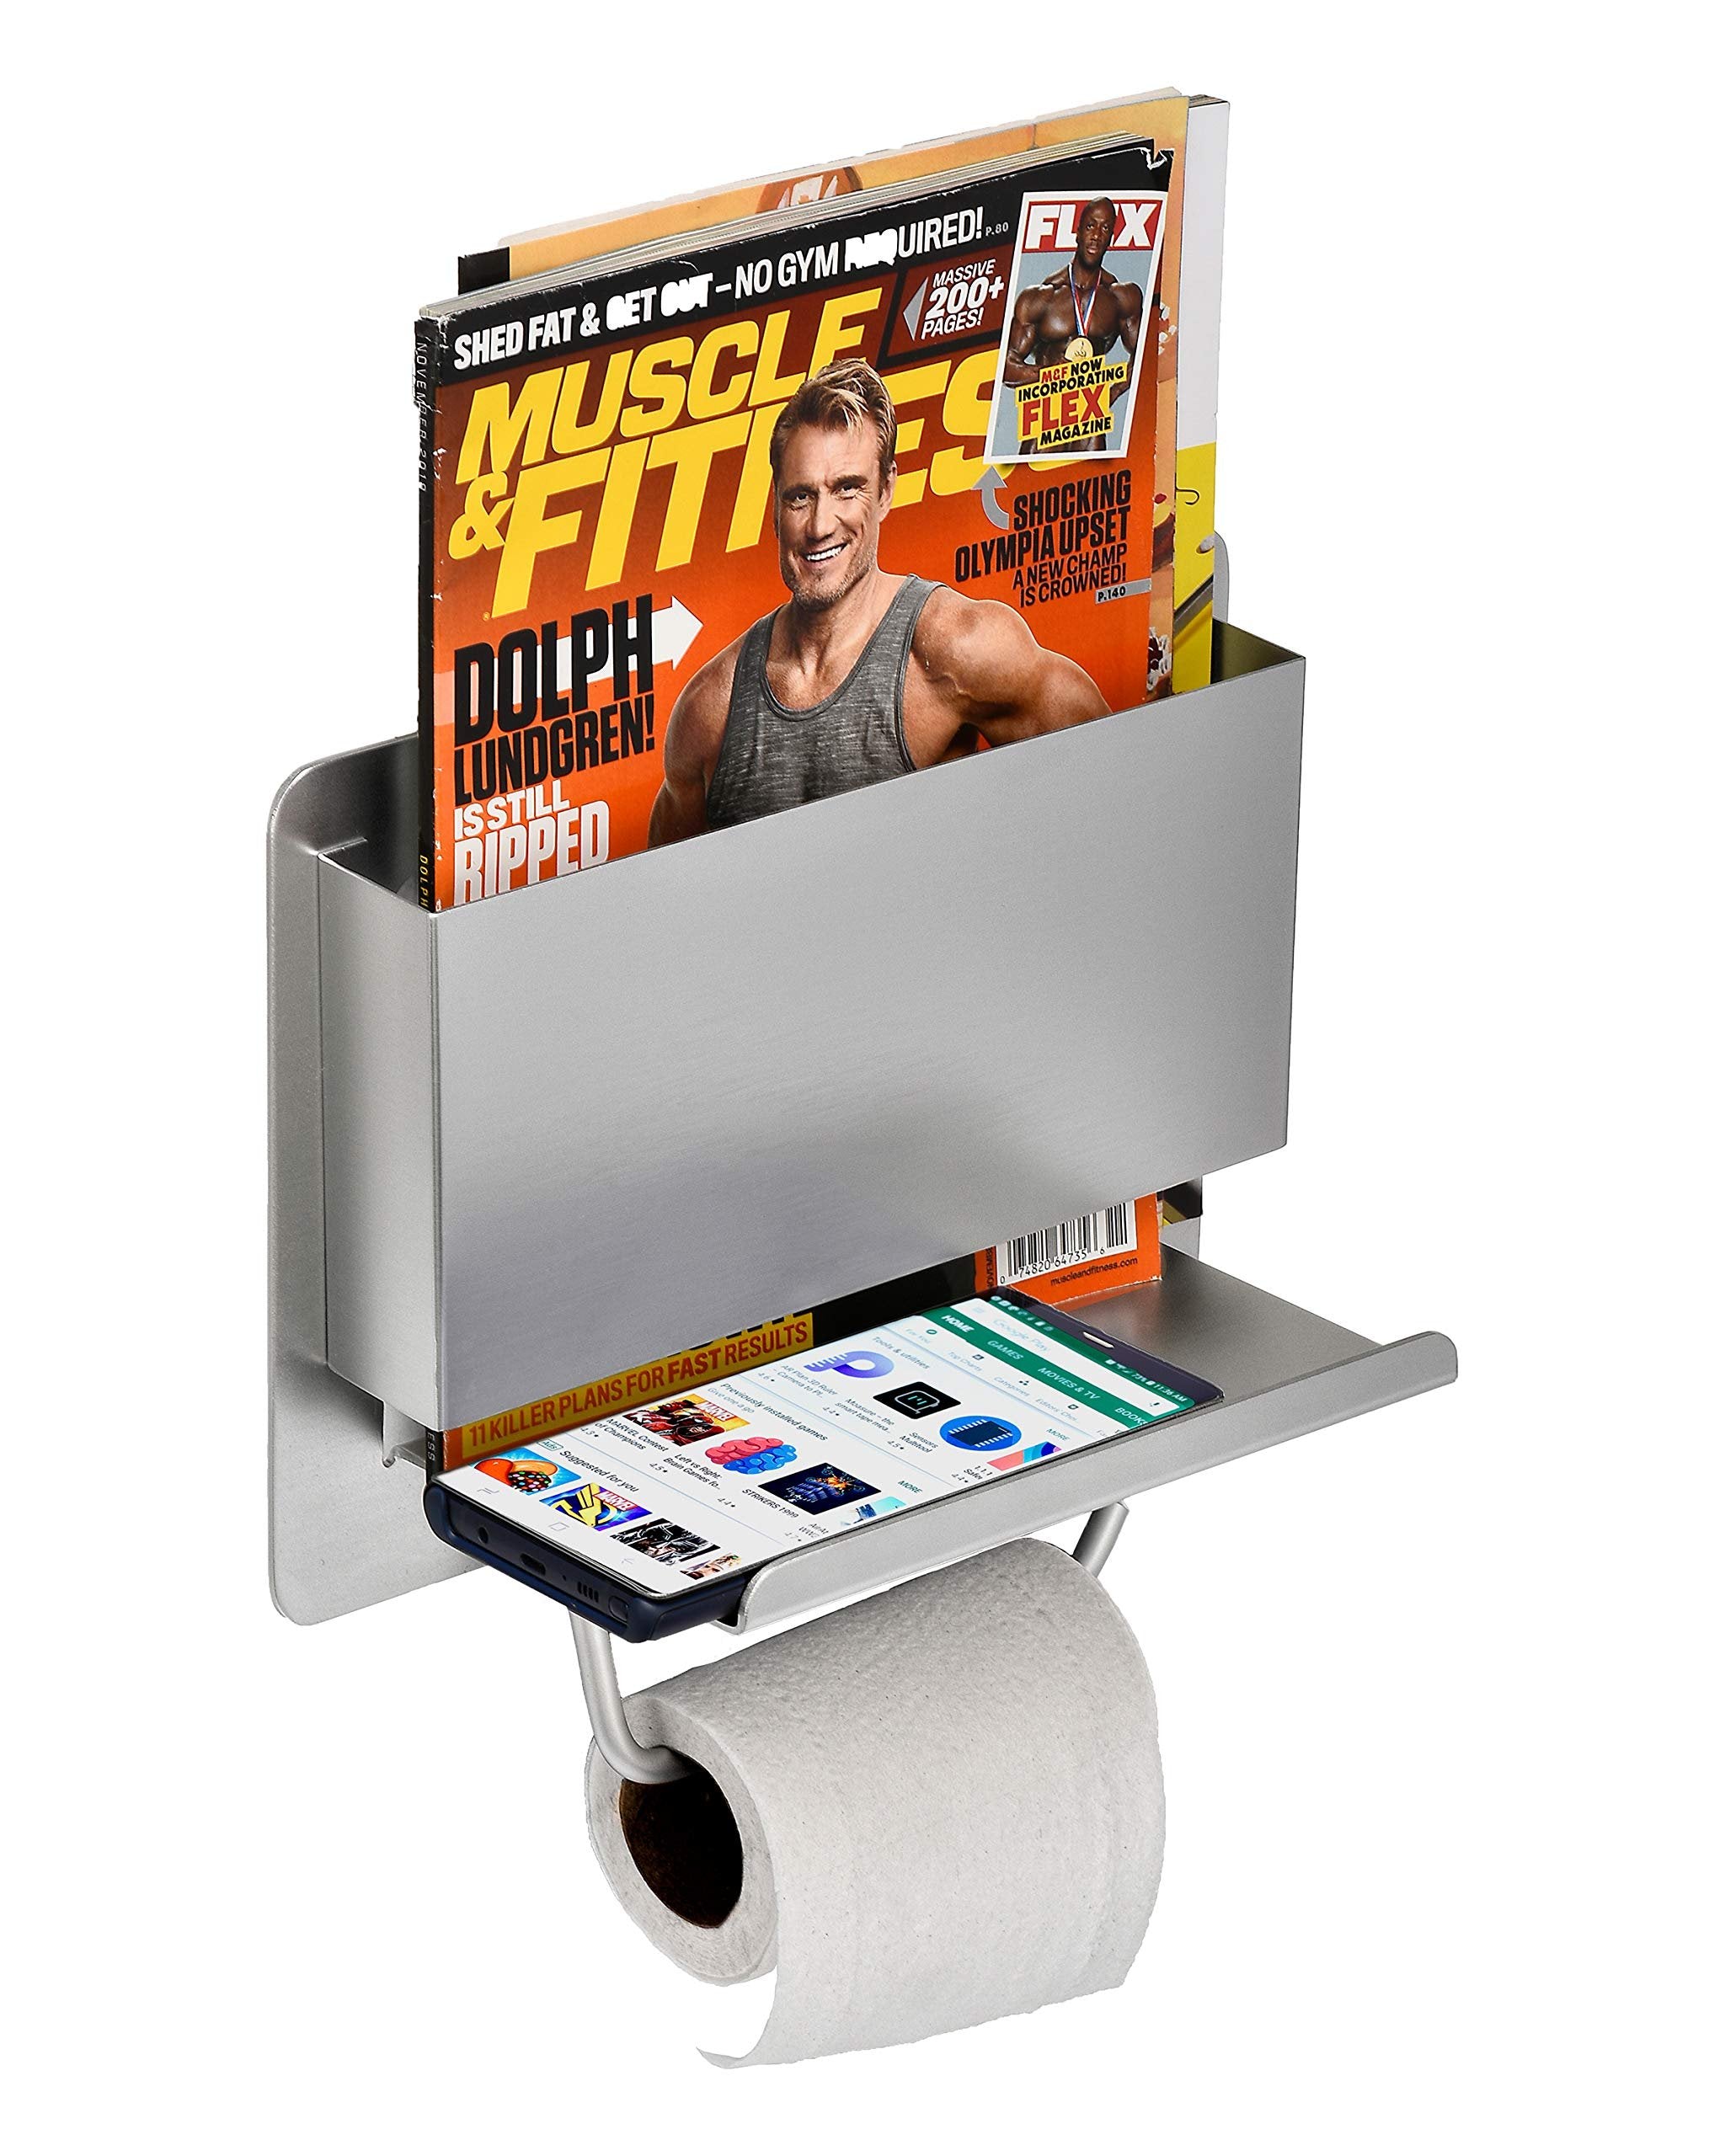 Stainless Steel Toilet Paper Holder with Shelf - Fits All Mobile Phones - Bathroom Rack, Magazine Organizer - Dispenser - {} {}.format(size or , Stainless Steel)